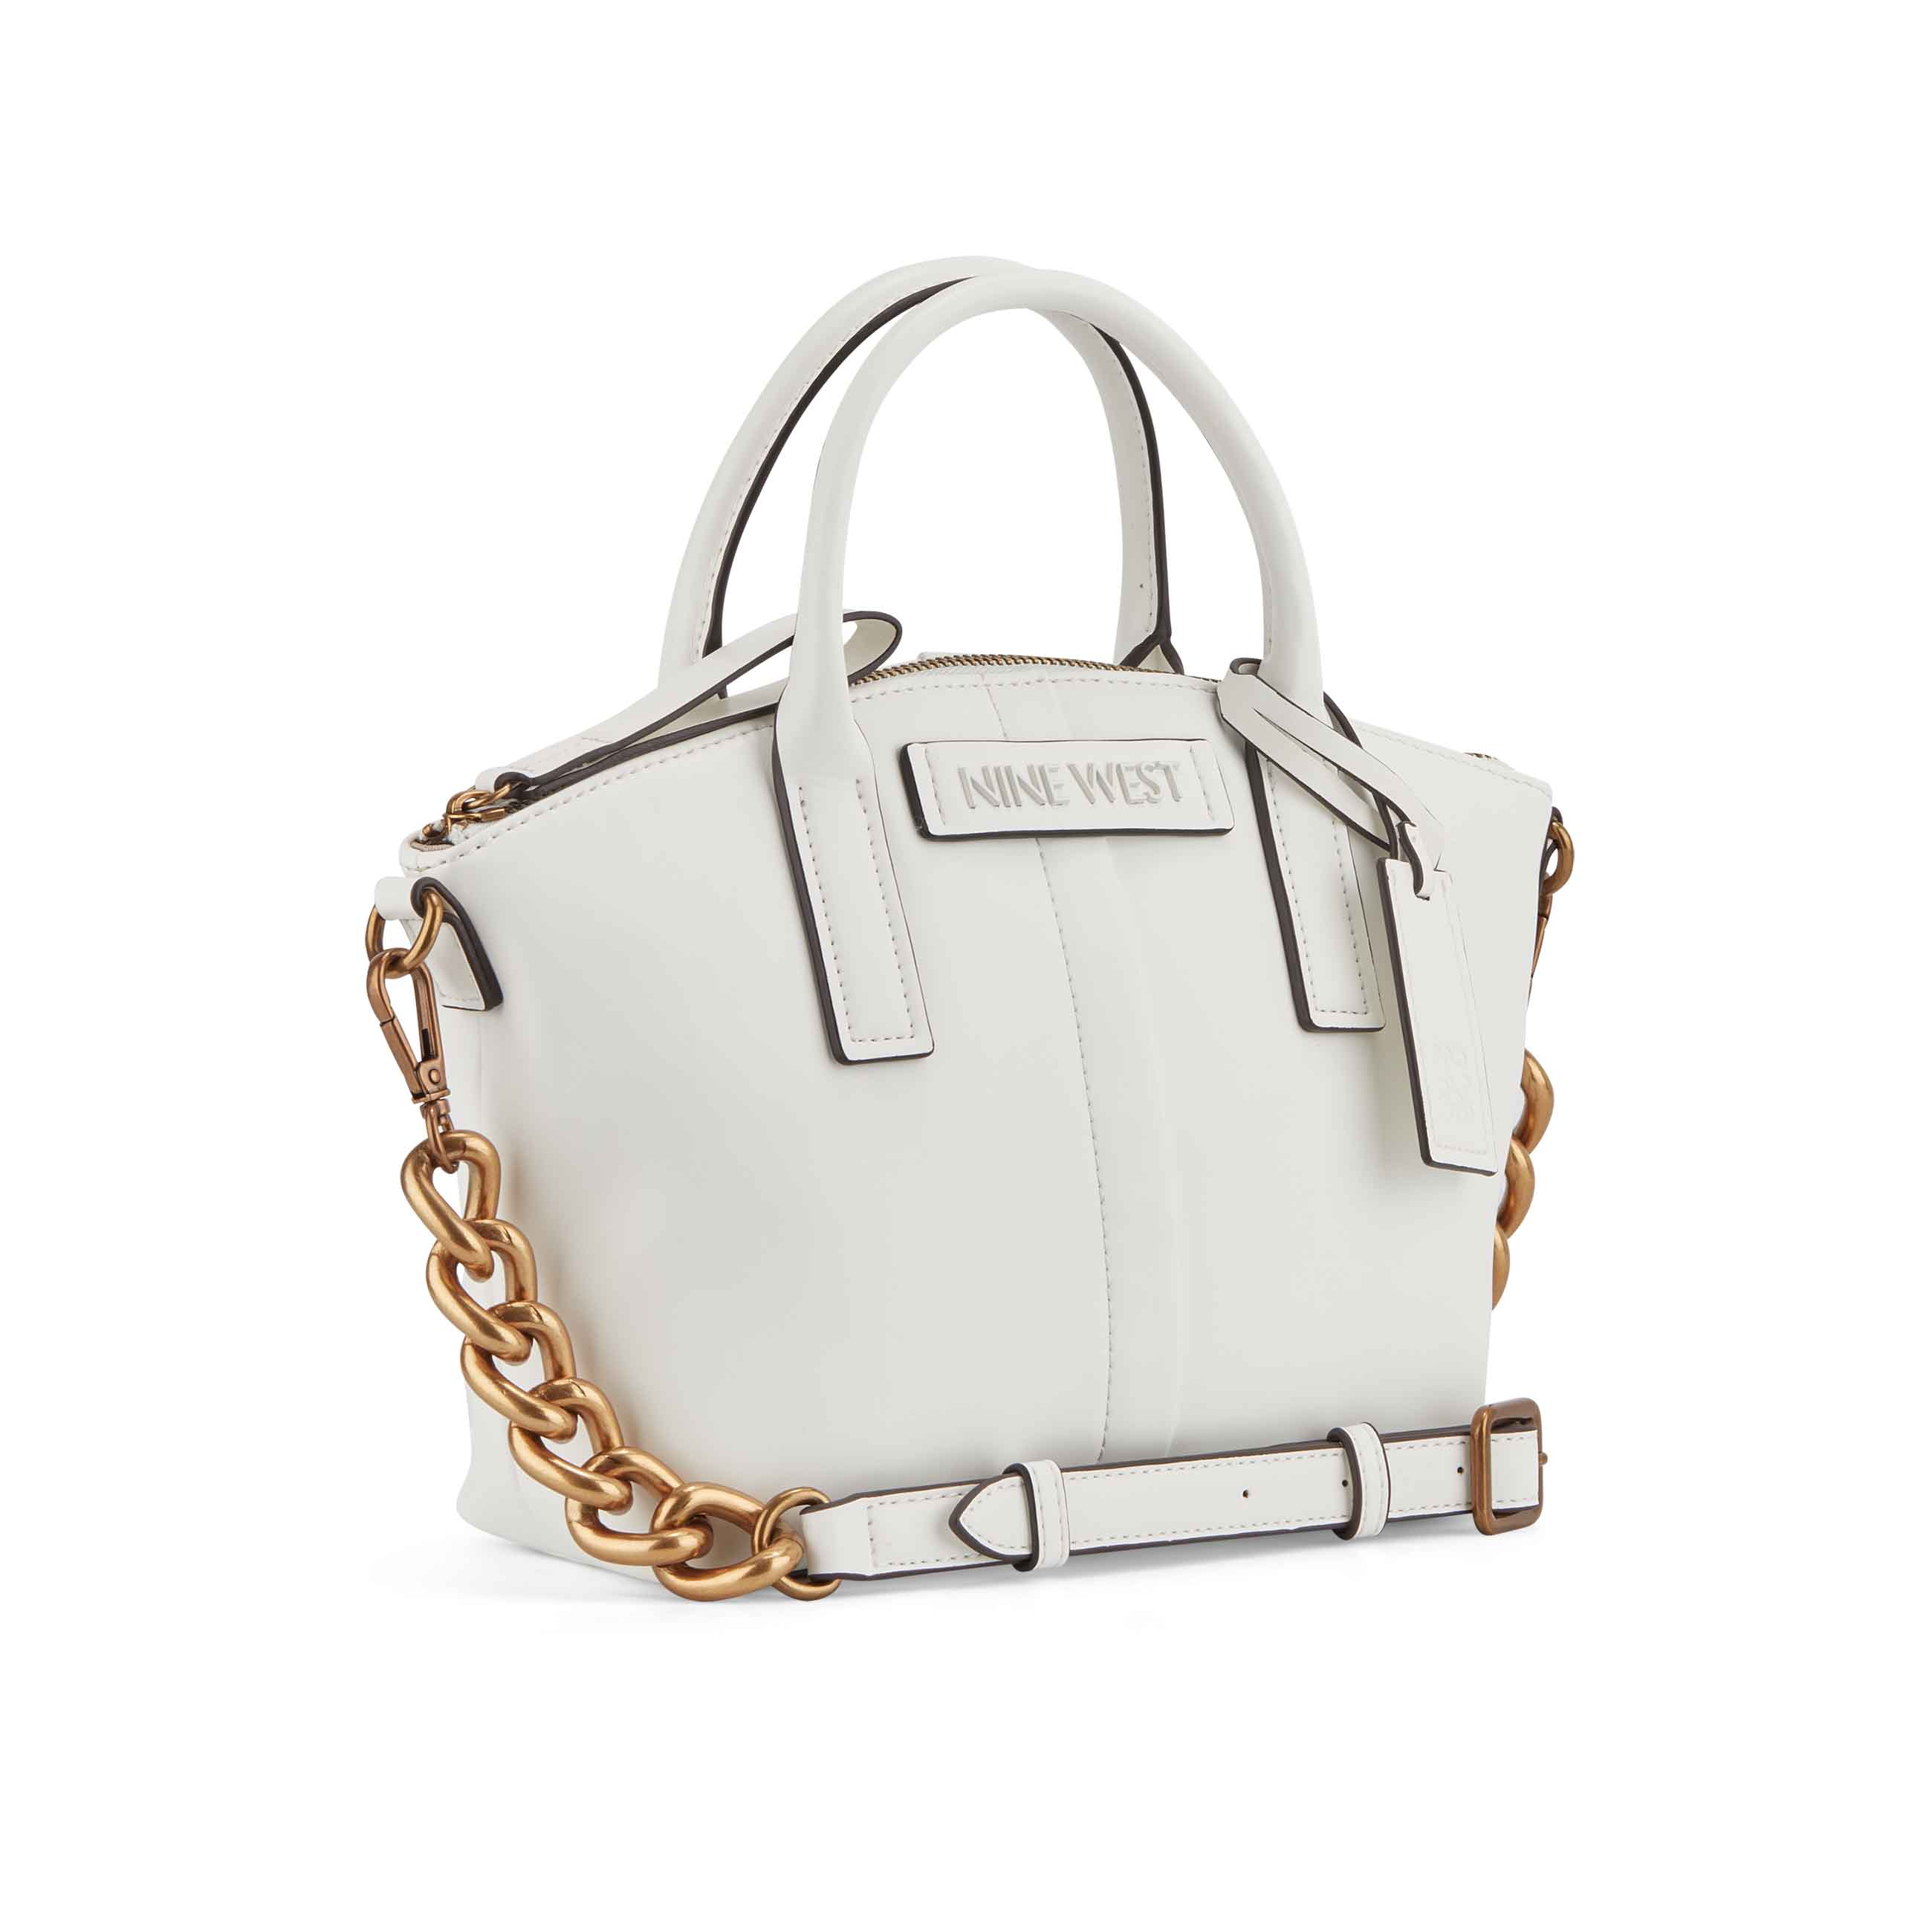 Satchels & Shoulder Bags, Nine West Womens Payton Small Tote Optic White